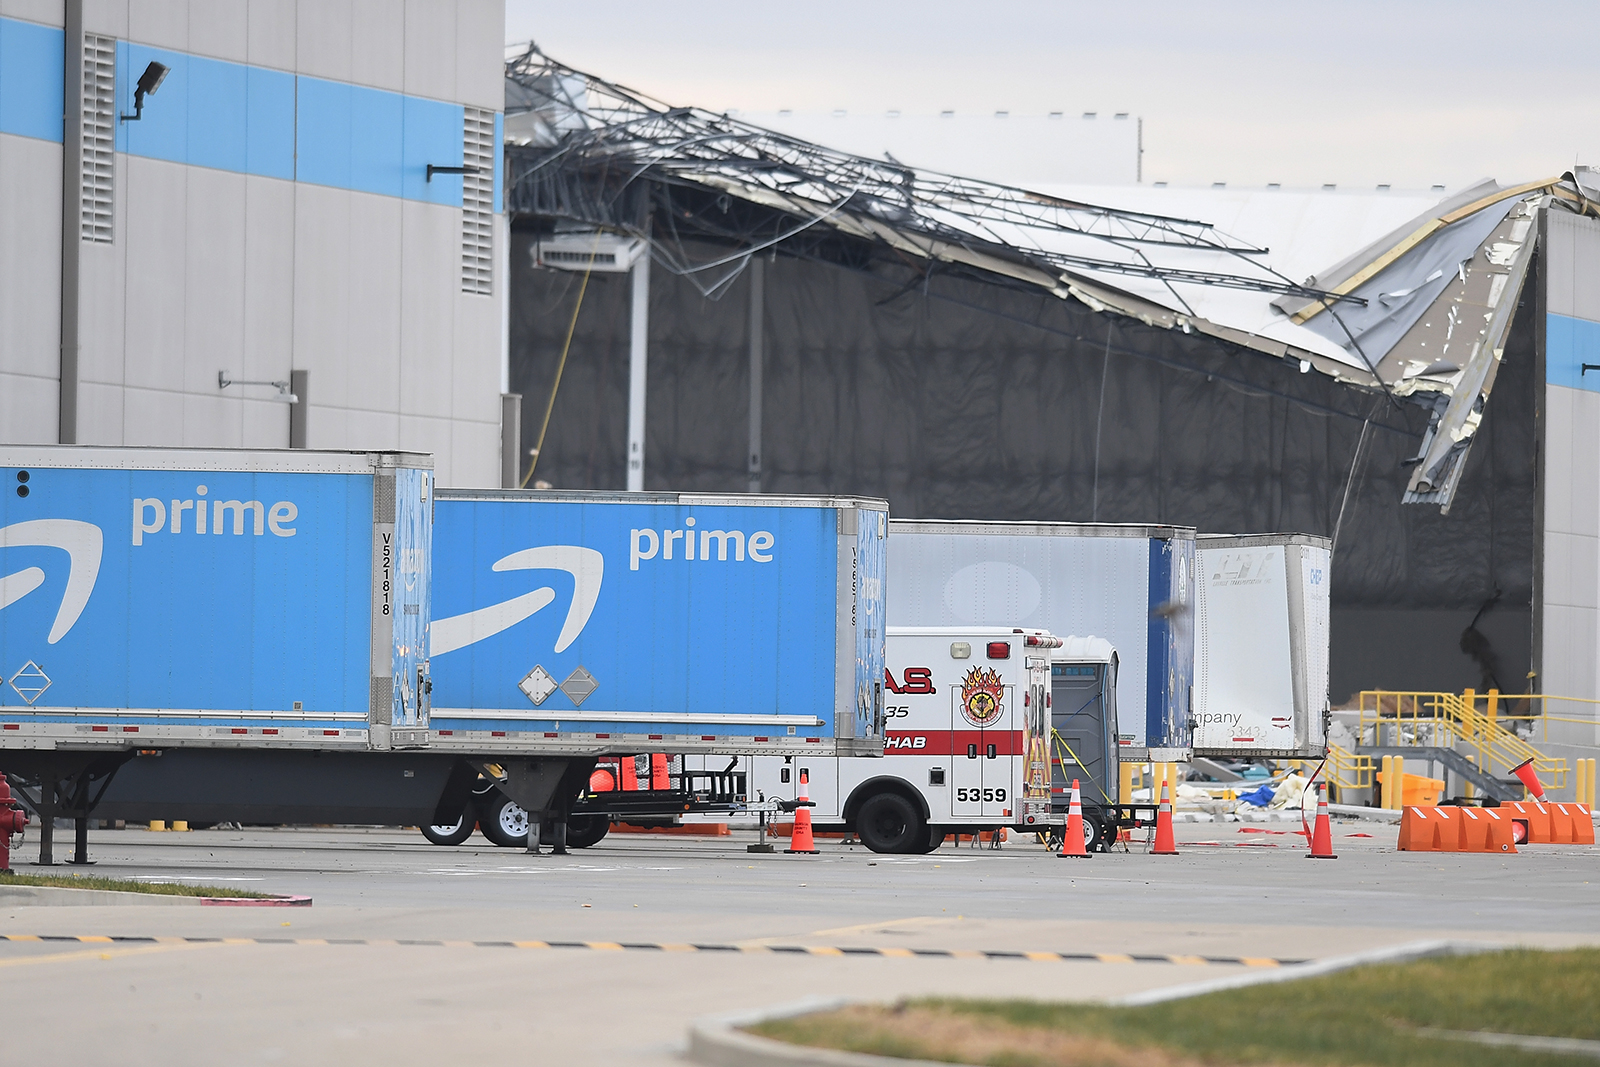 Amazon truck cabs are seen outside a damaged Amazon Distribution Center on December 11, in Edwardsville, Illinois. (Michael B. Thomas/Getty Images)